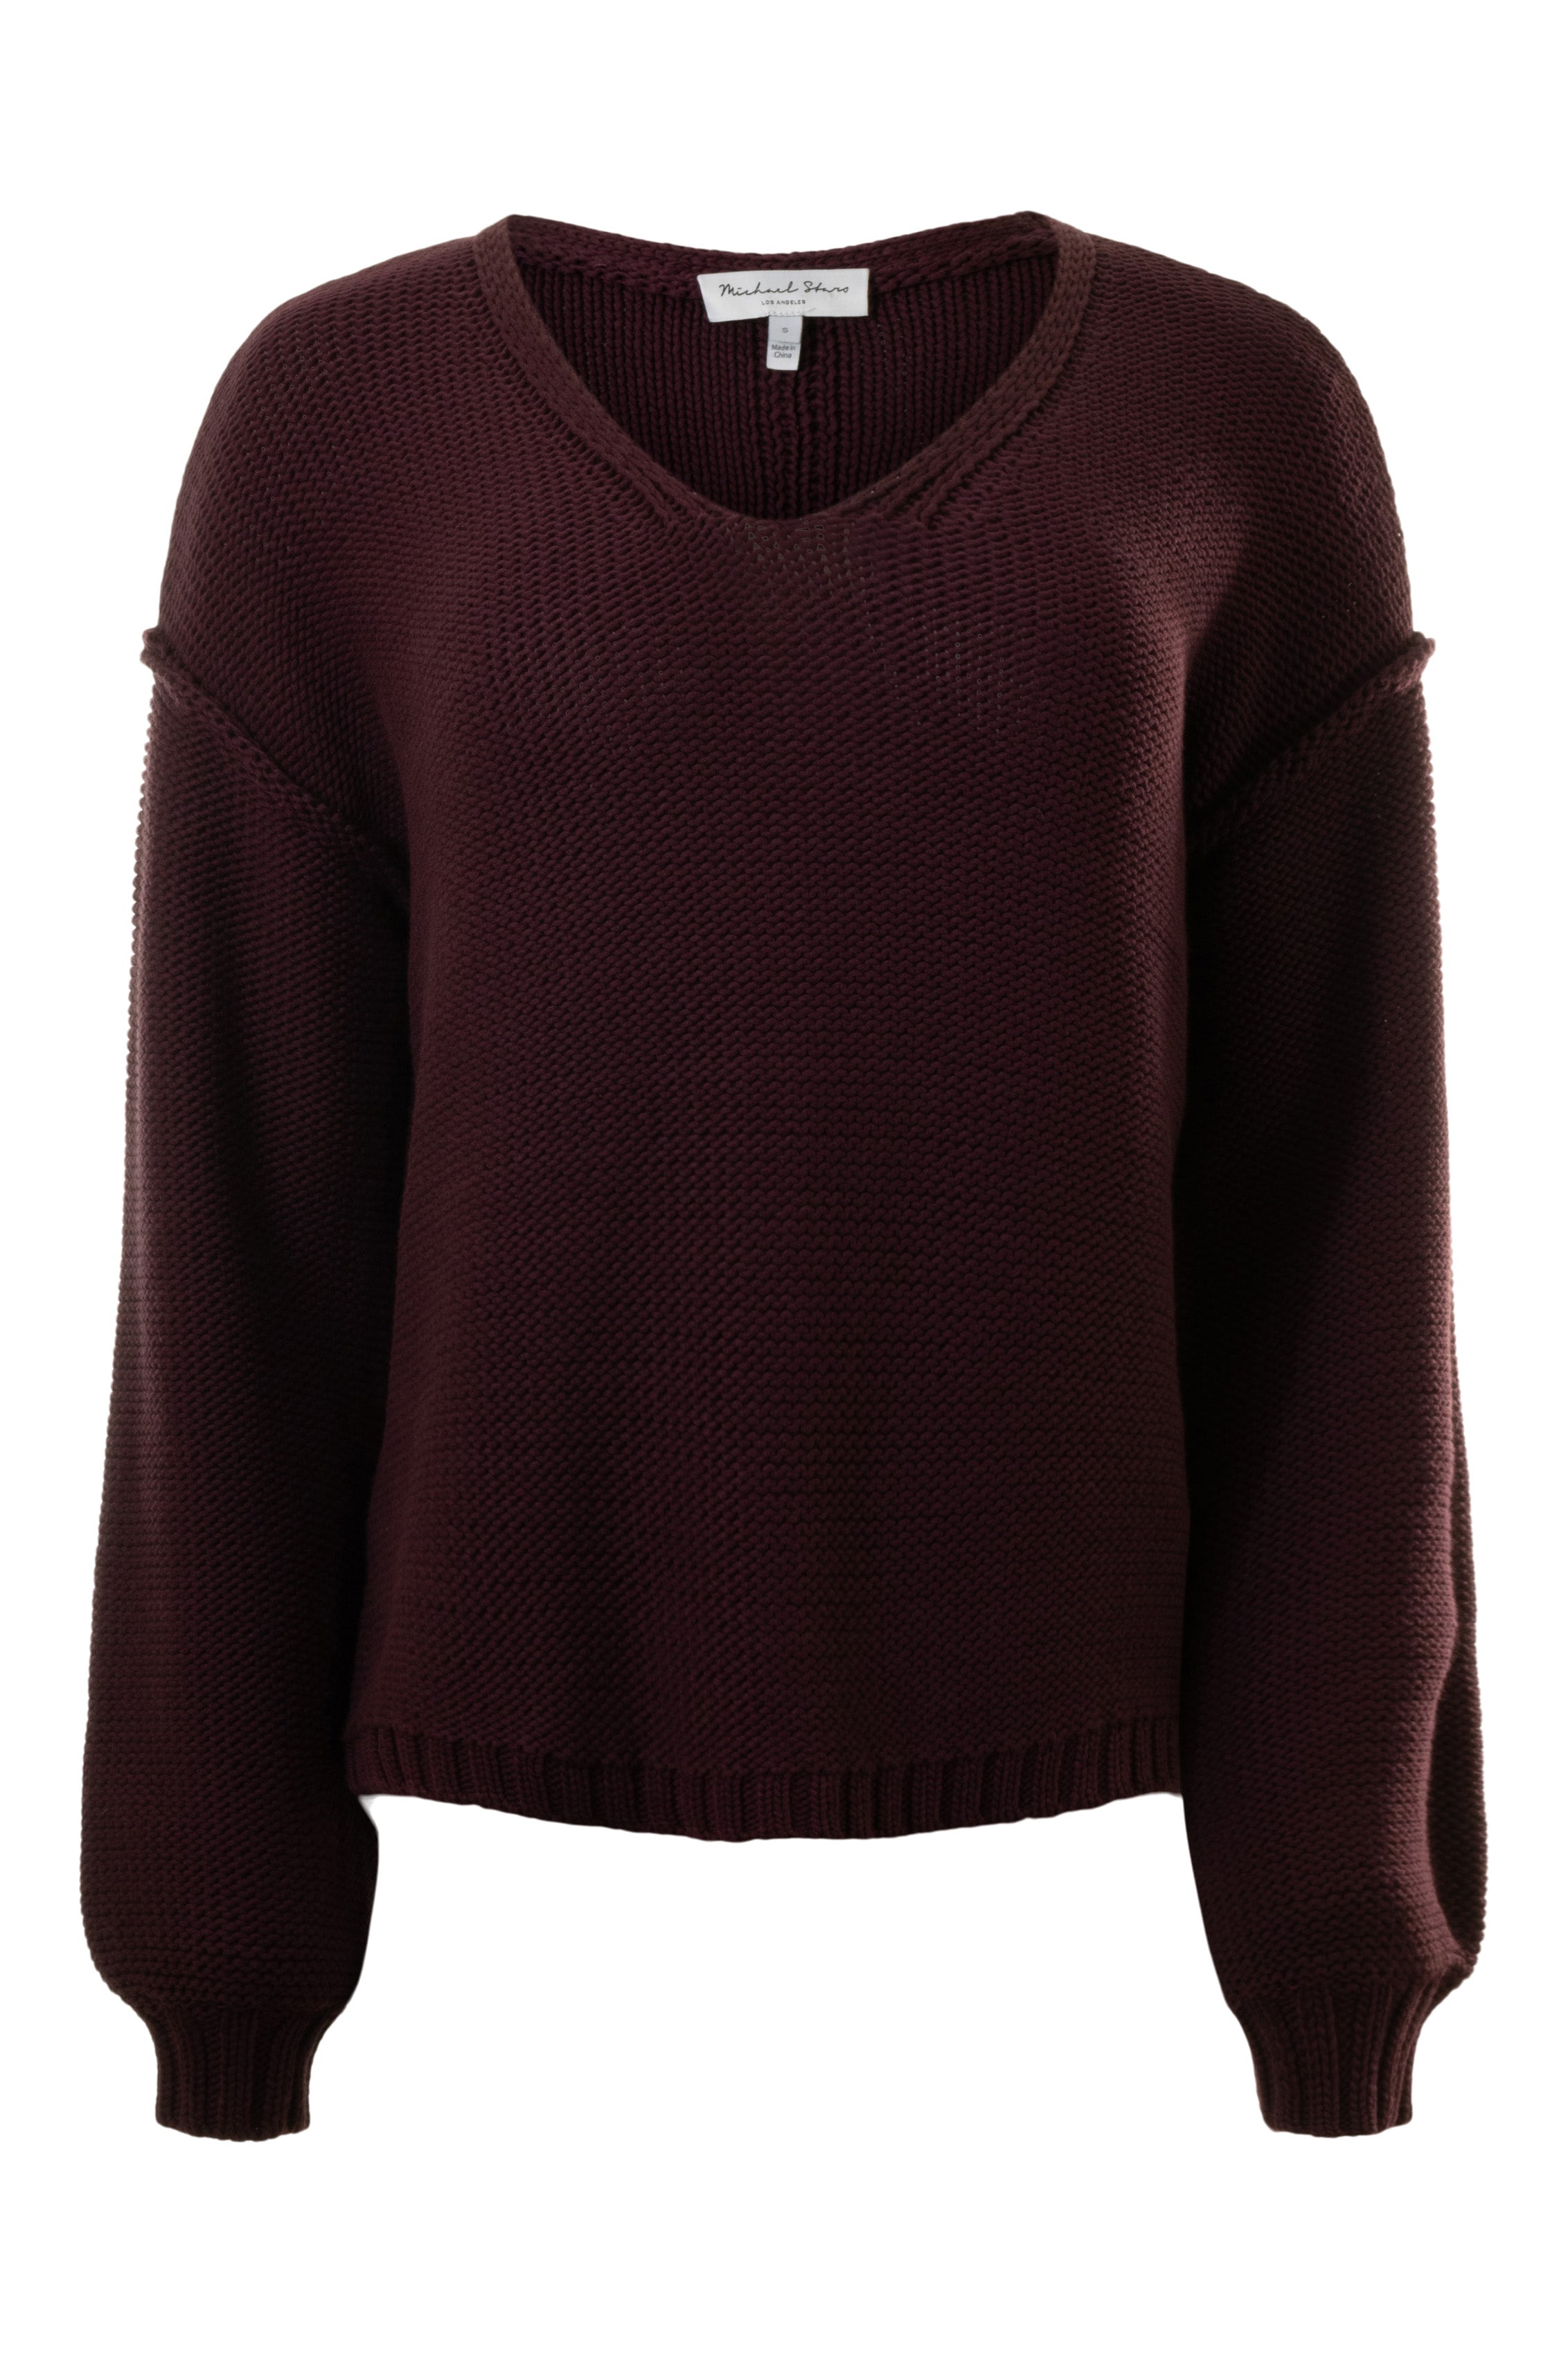 Michael Stars Kendra Relaxed Fit Sweater in Plum